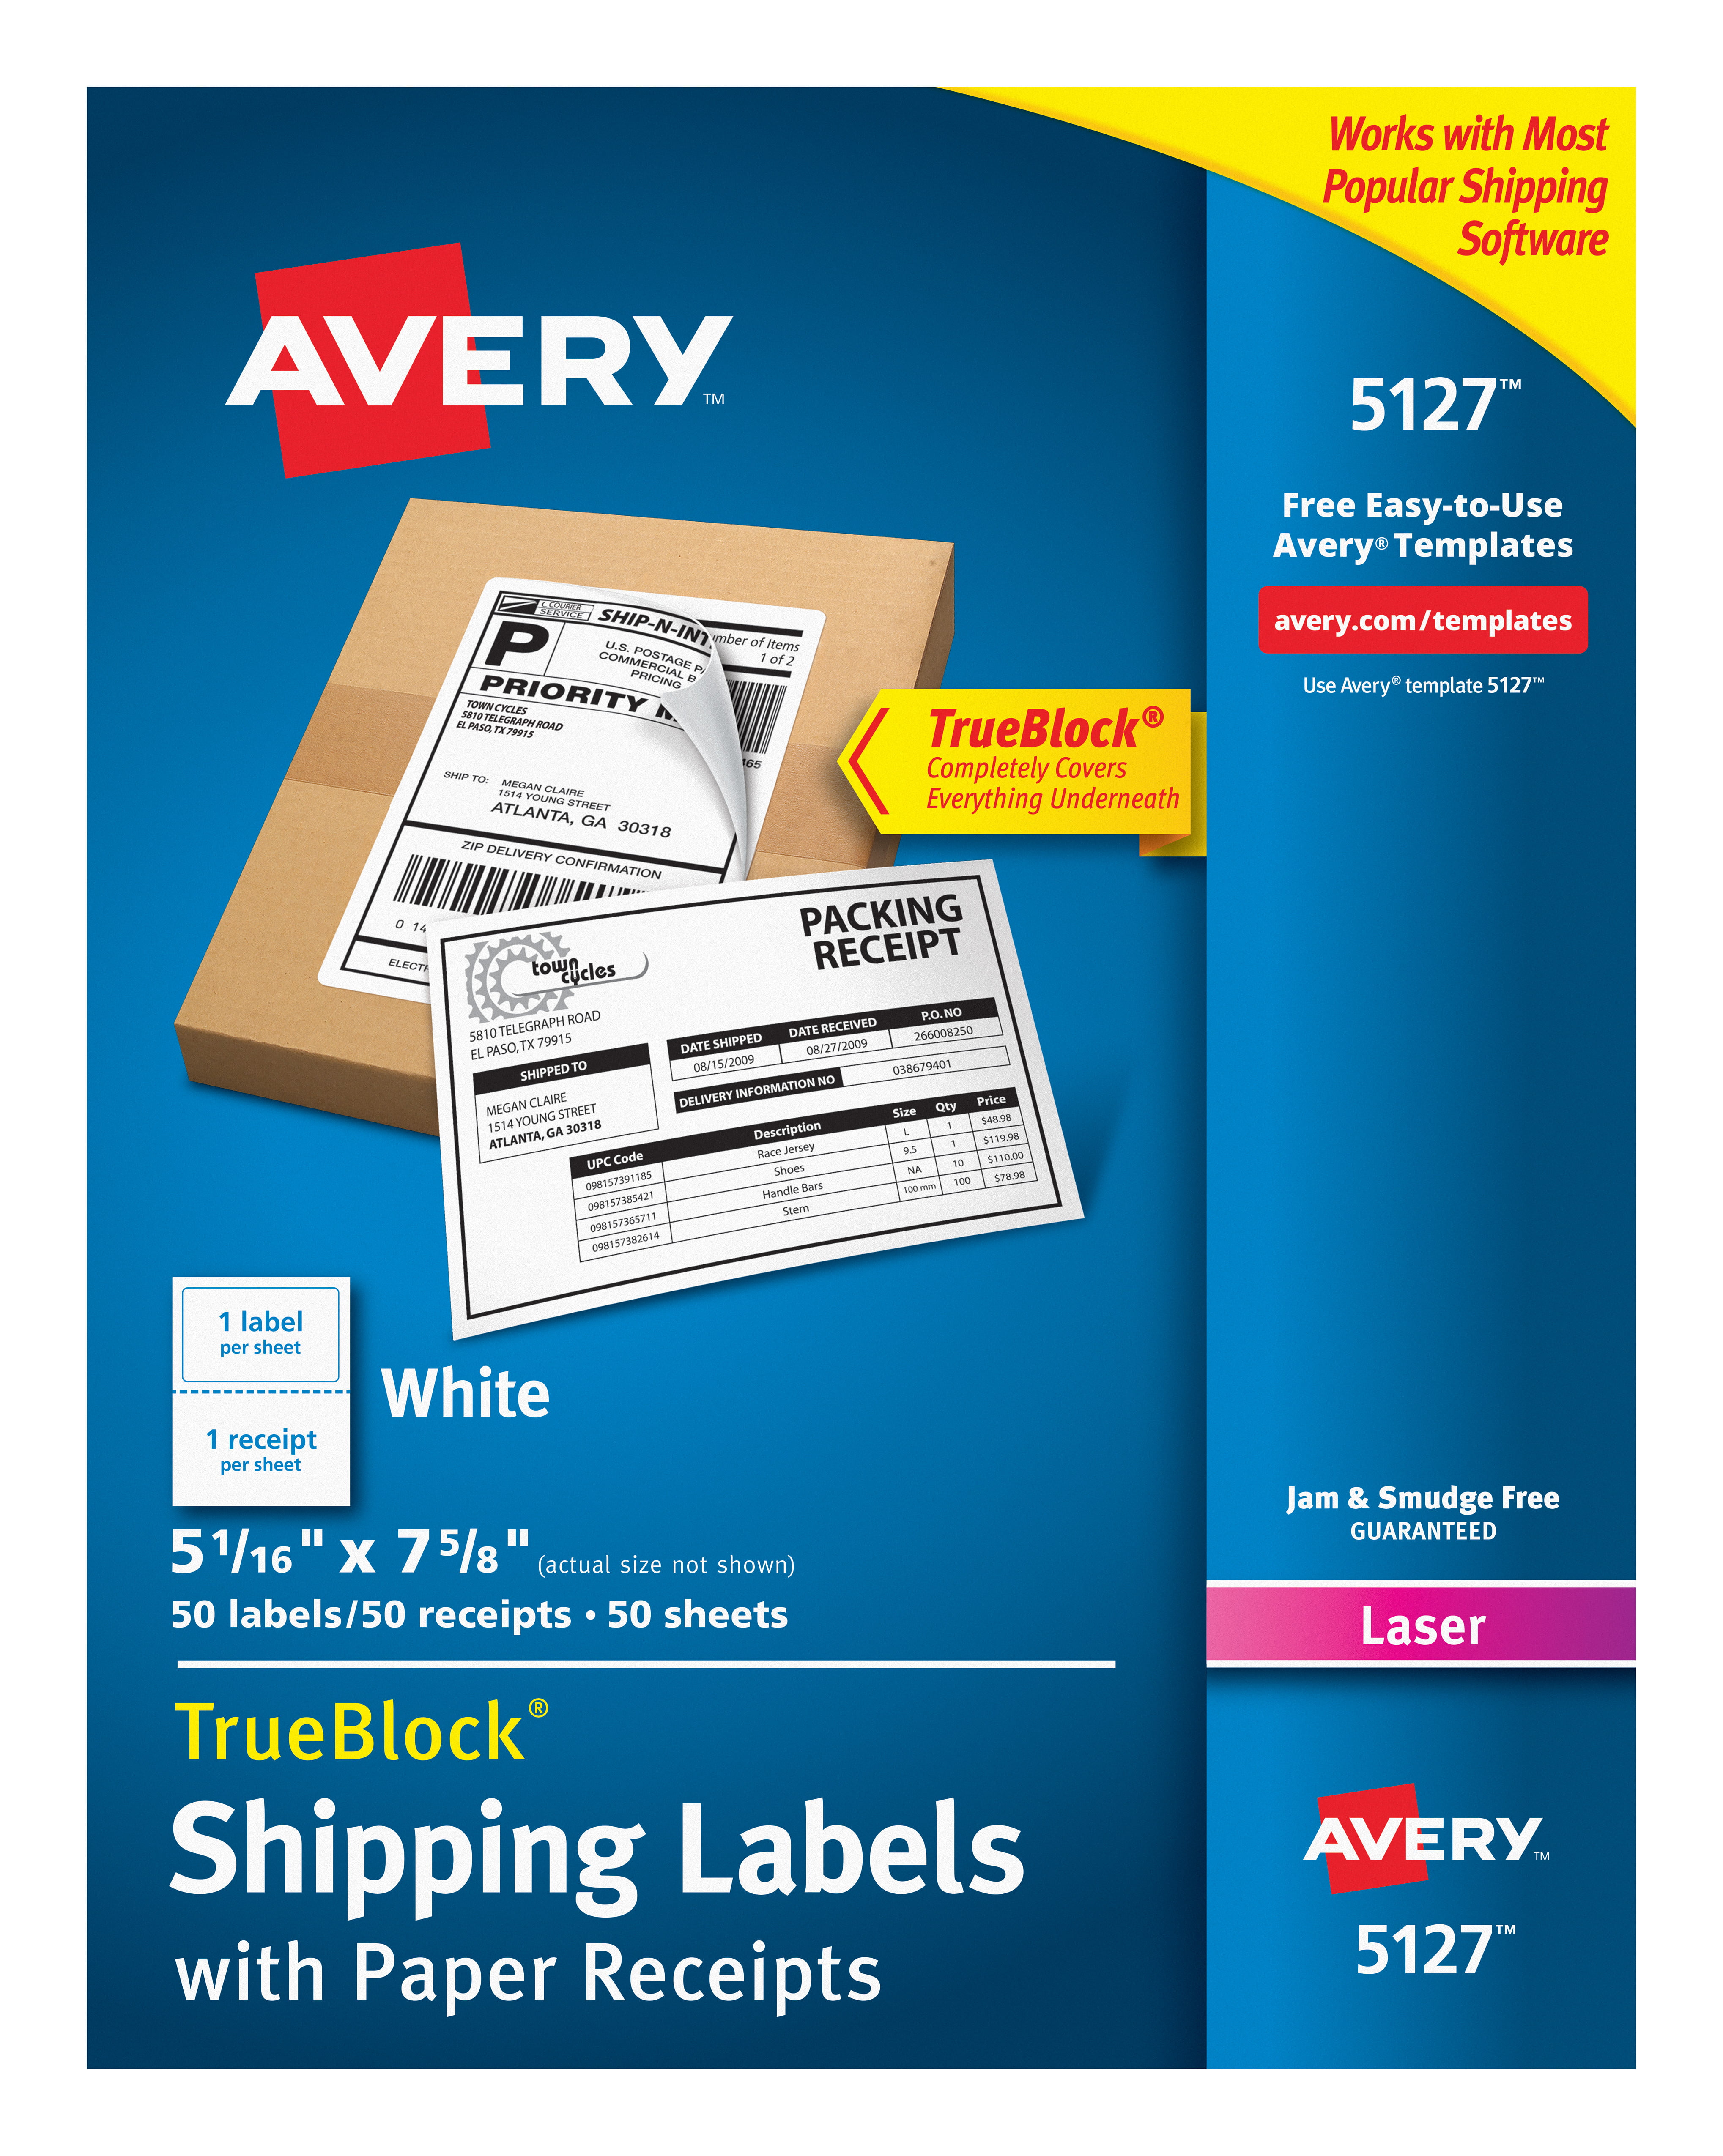 250  Premium Self Adhesive Paypal Ship Labels 8.5 x 5.5 Use with Laser or InkJet 